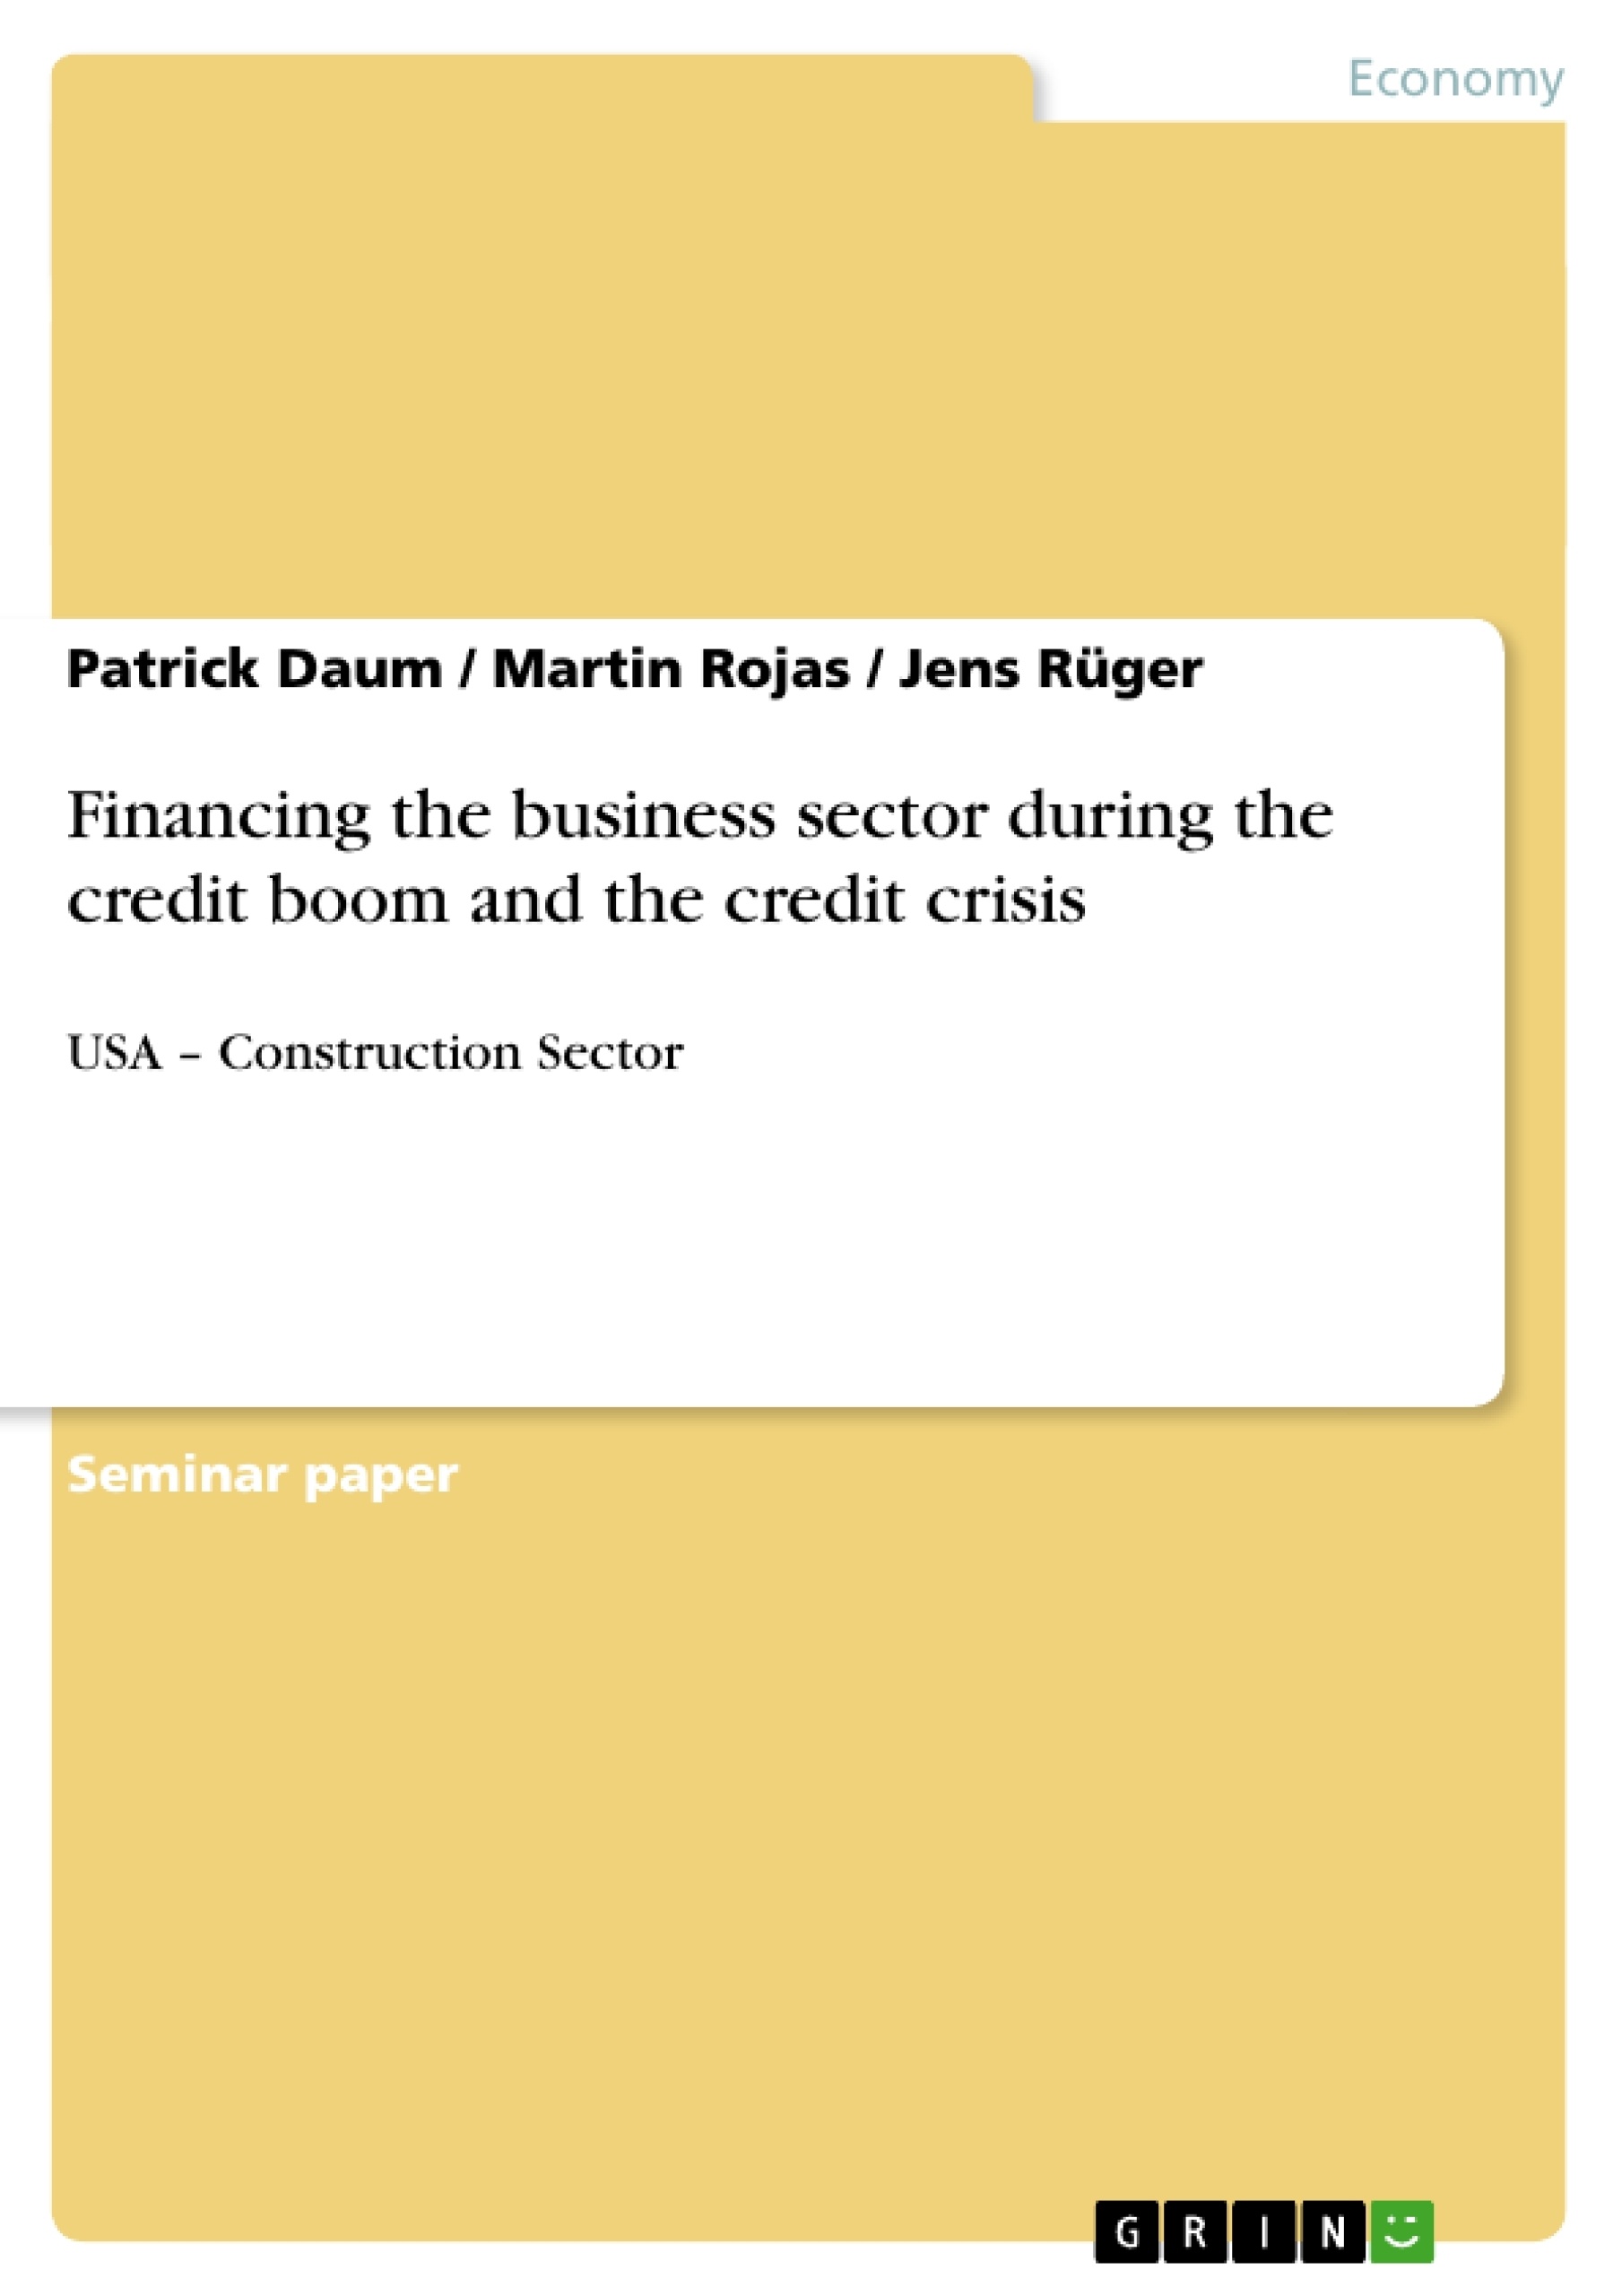 Title: Financing the business sector during the credit boom and the credit crisis